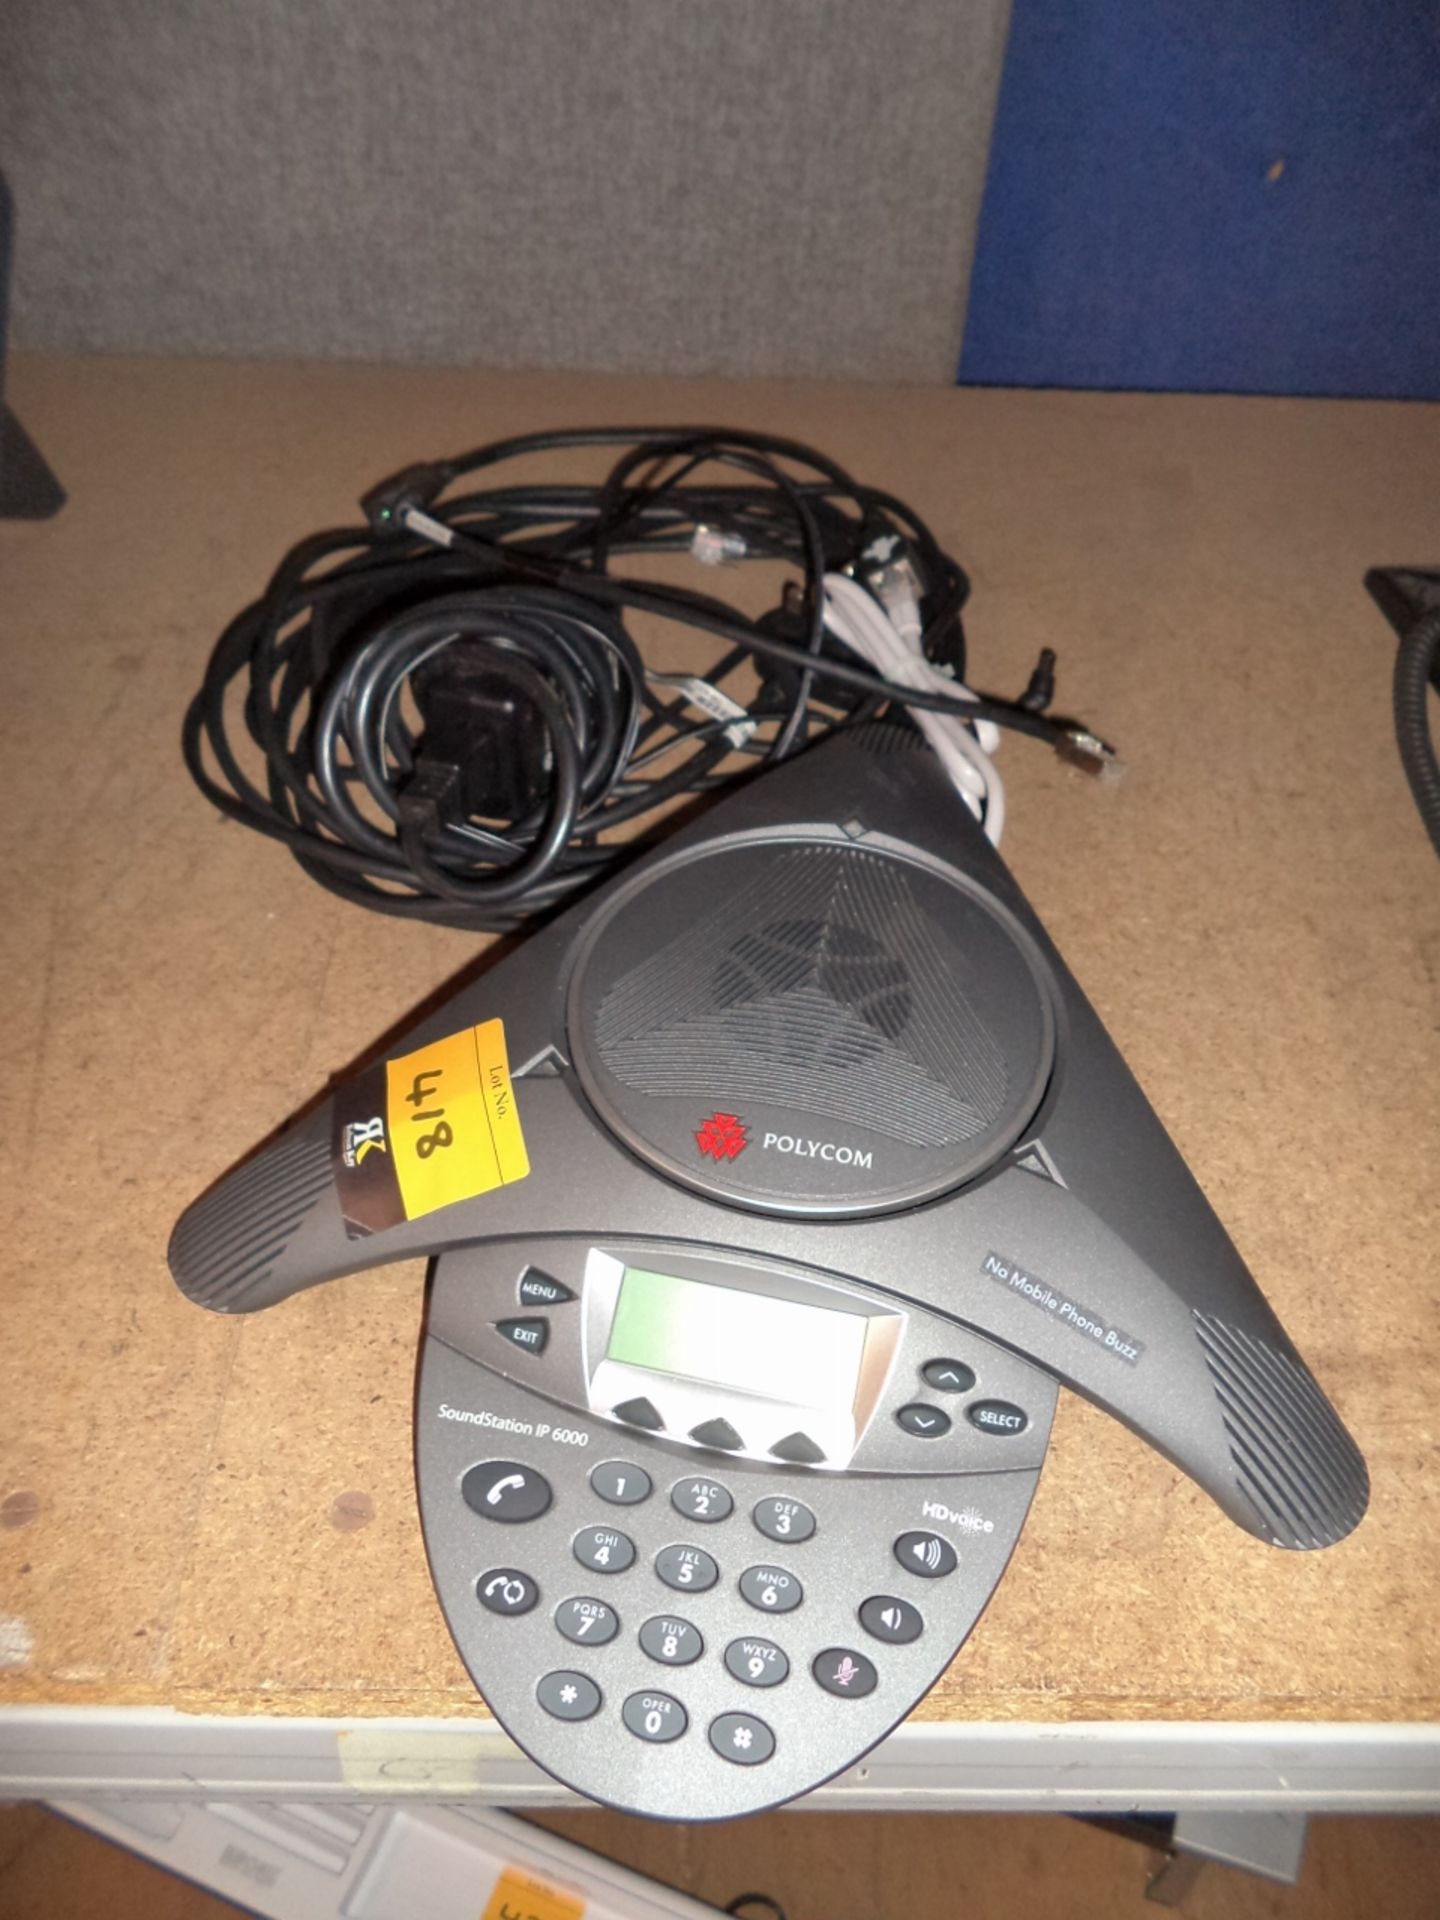 Polycom Sound Station IP6000 VOIP conference phone, with HD voice, no mobile phone buzz, the